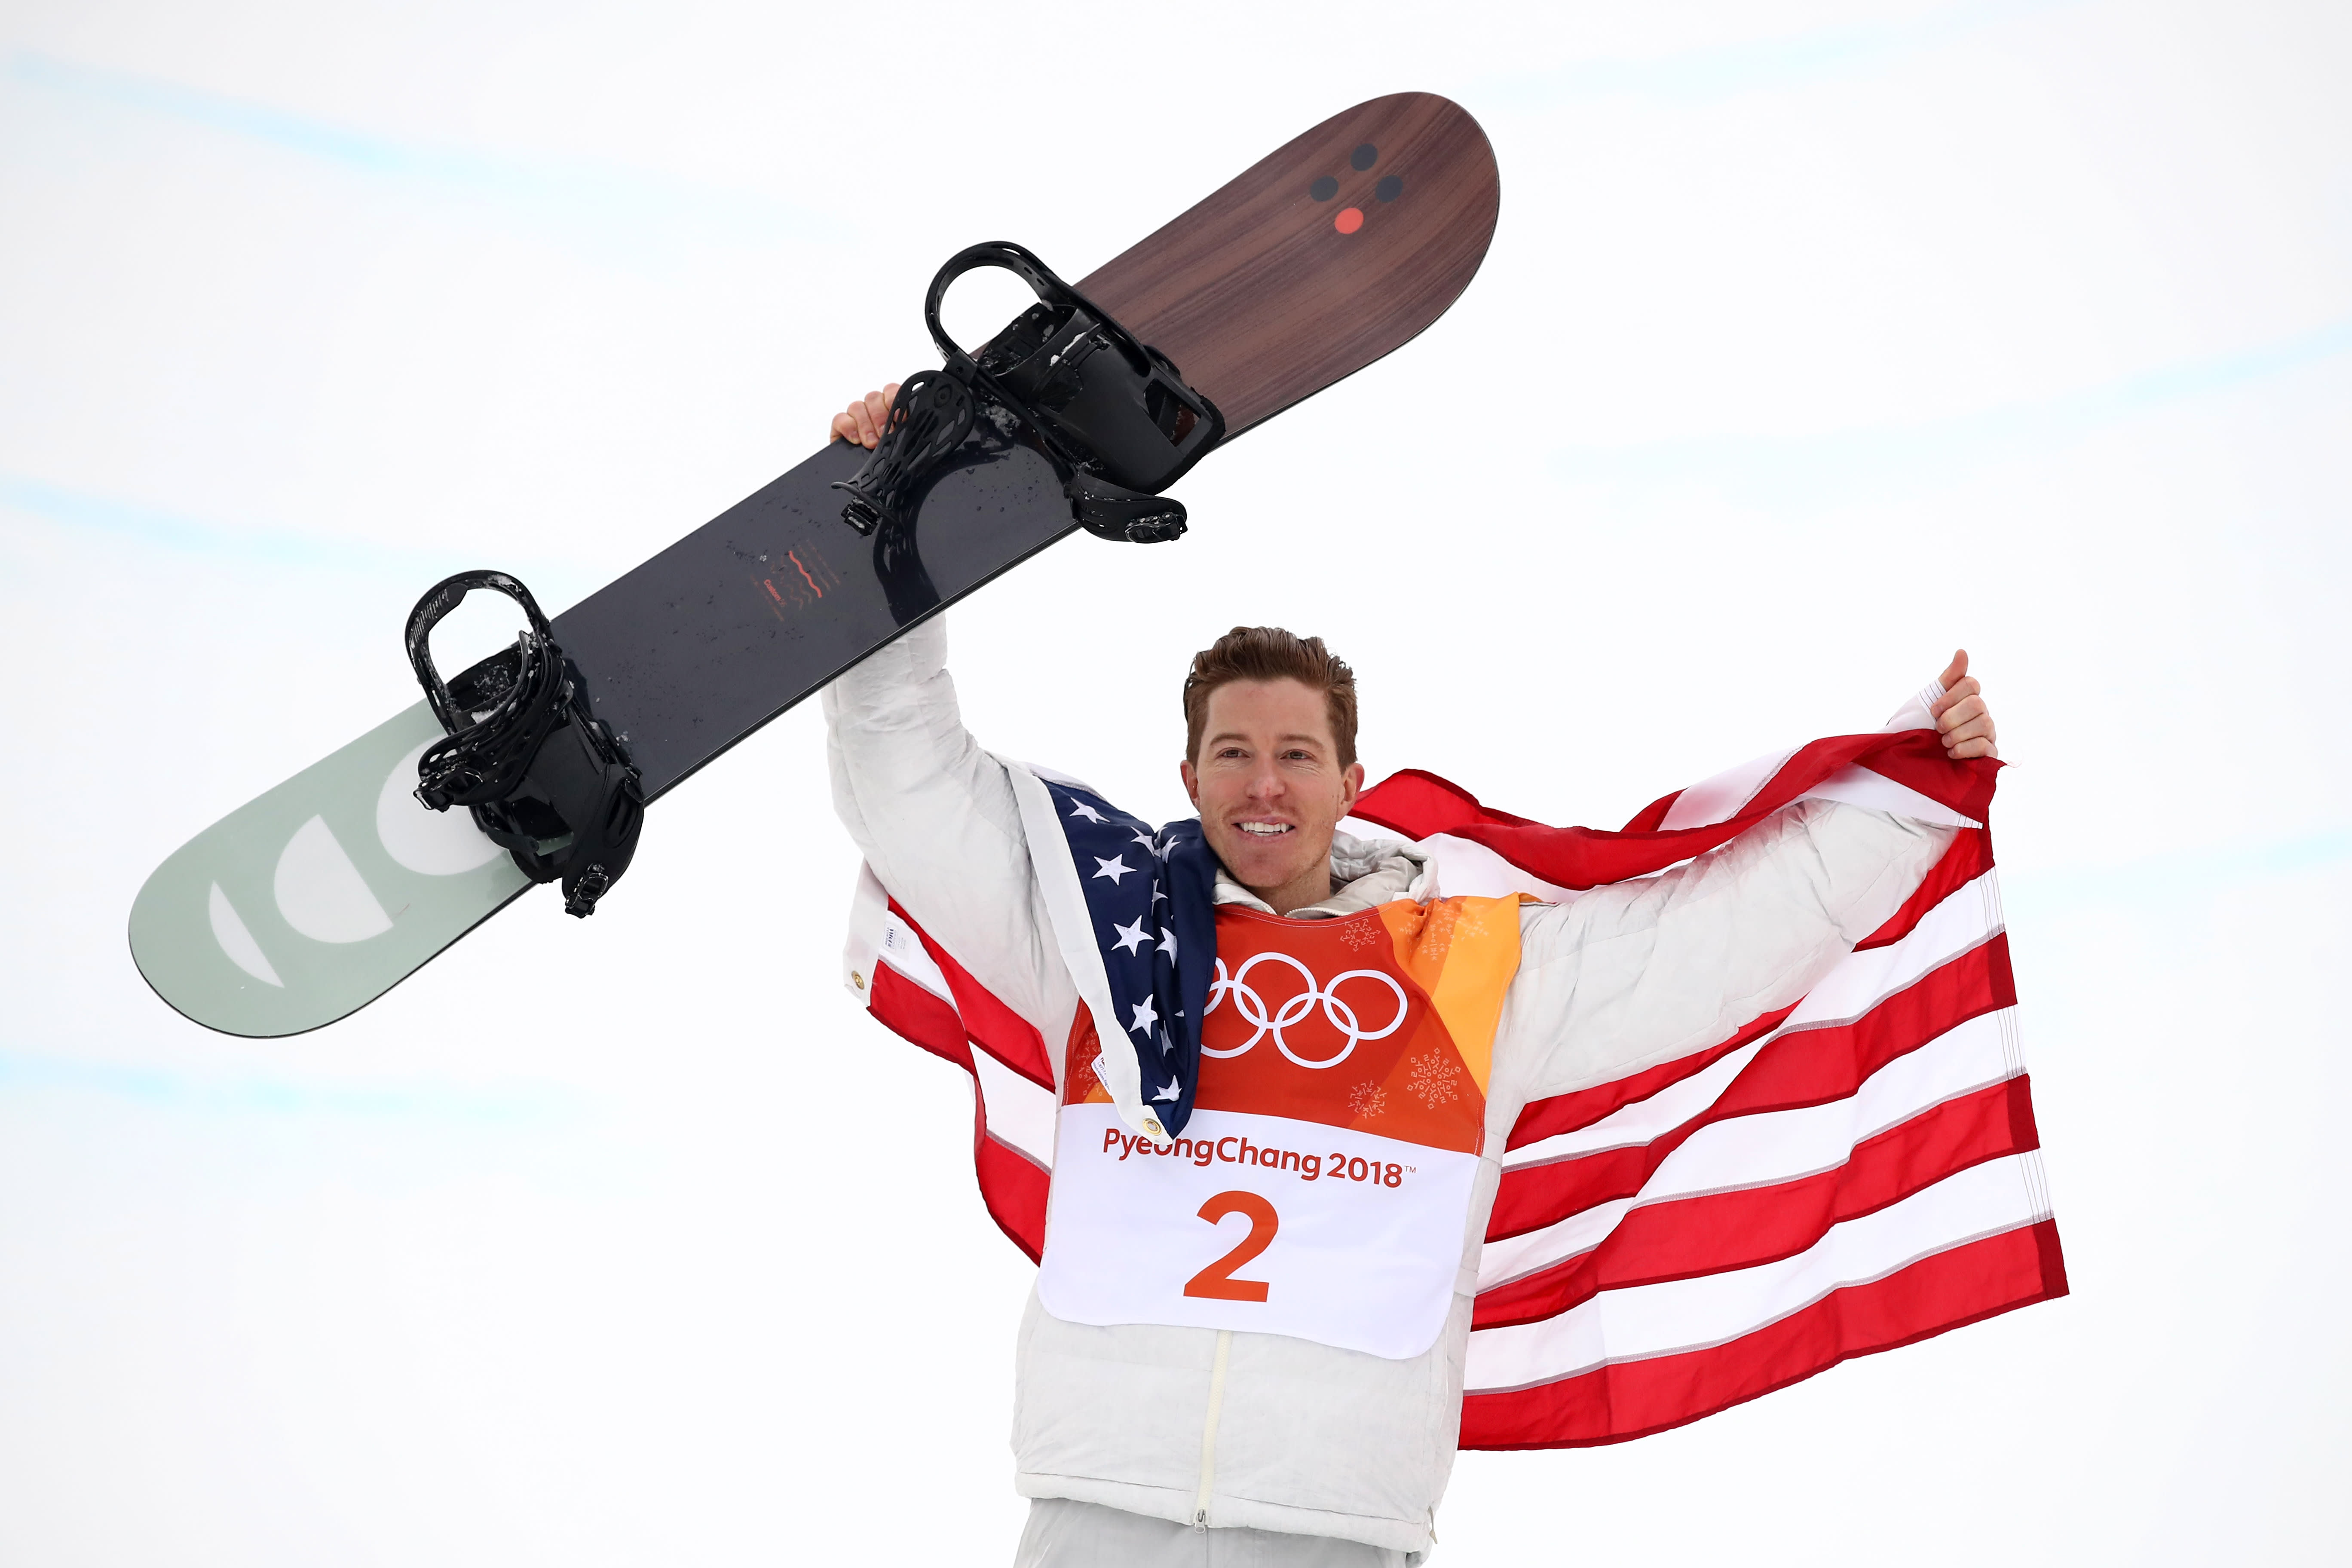 Snowboarding Legend Shaun White Set to Begin His Final Quest for Olympic Gold